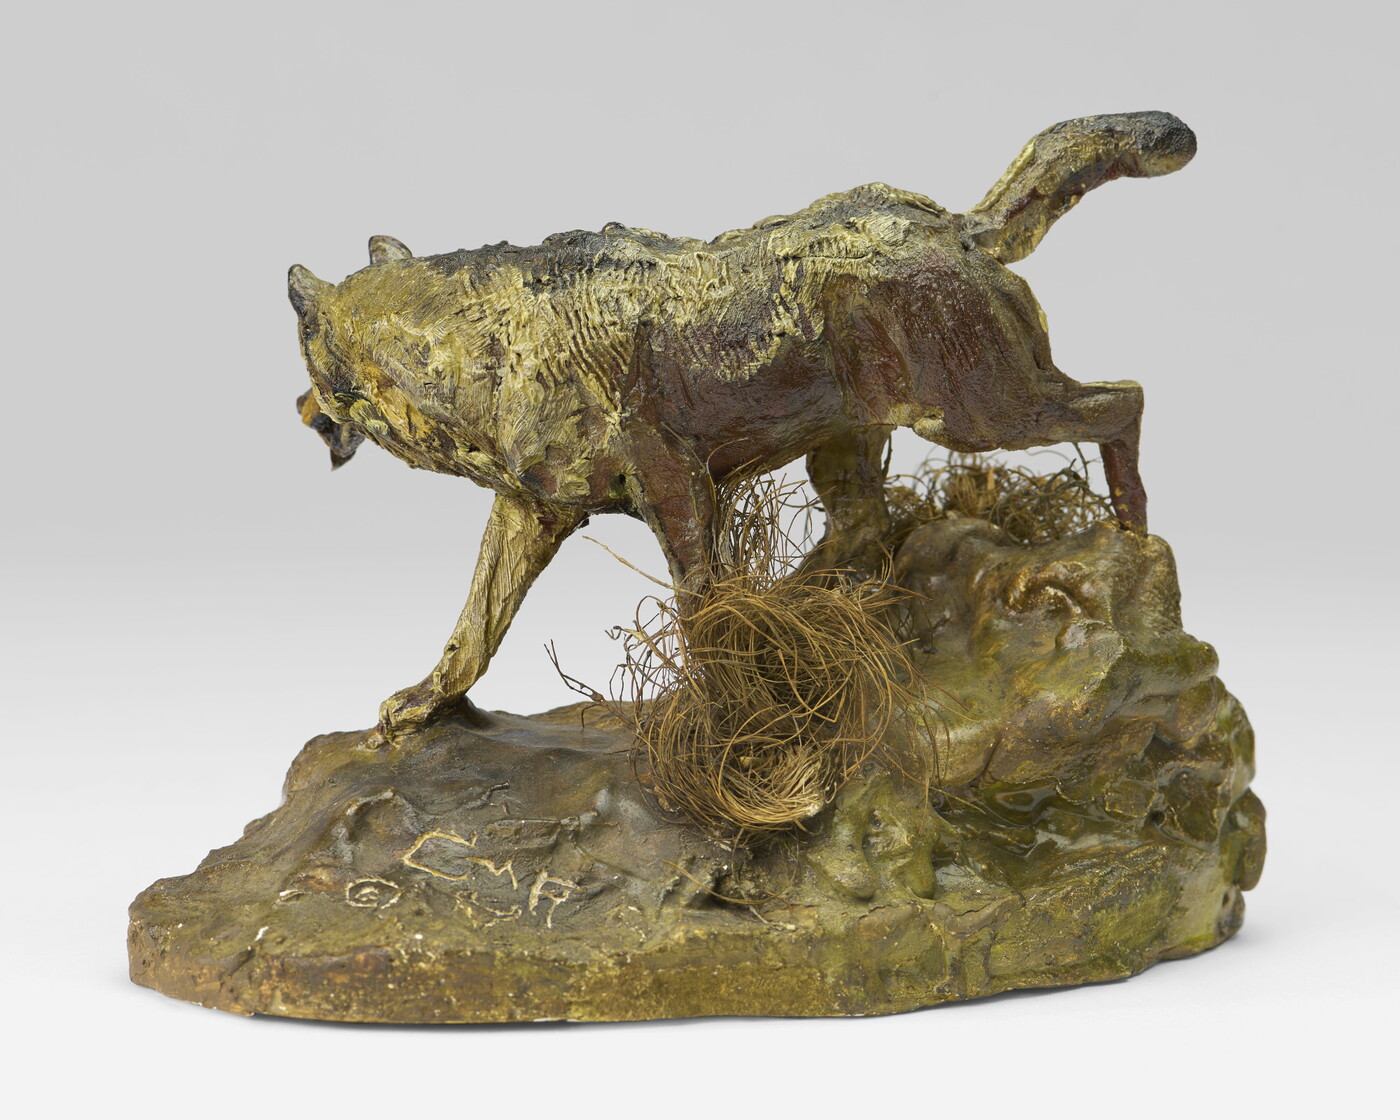 A painted sculpture of a wolf walking across patches of grass on a rock.